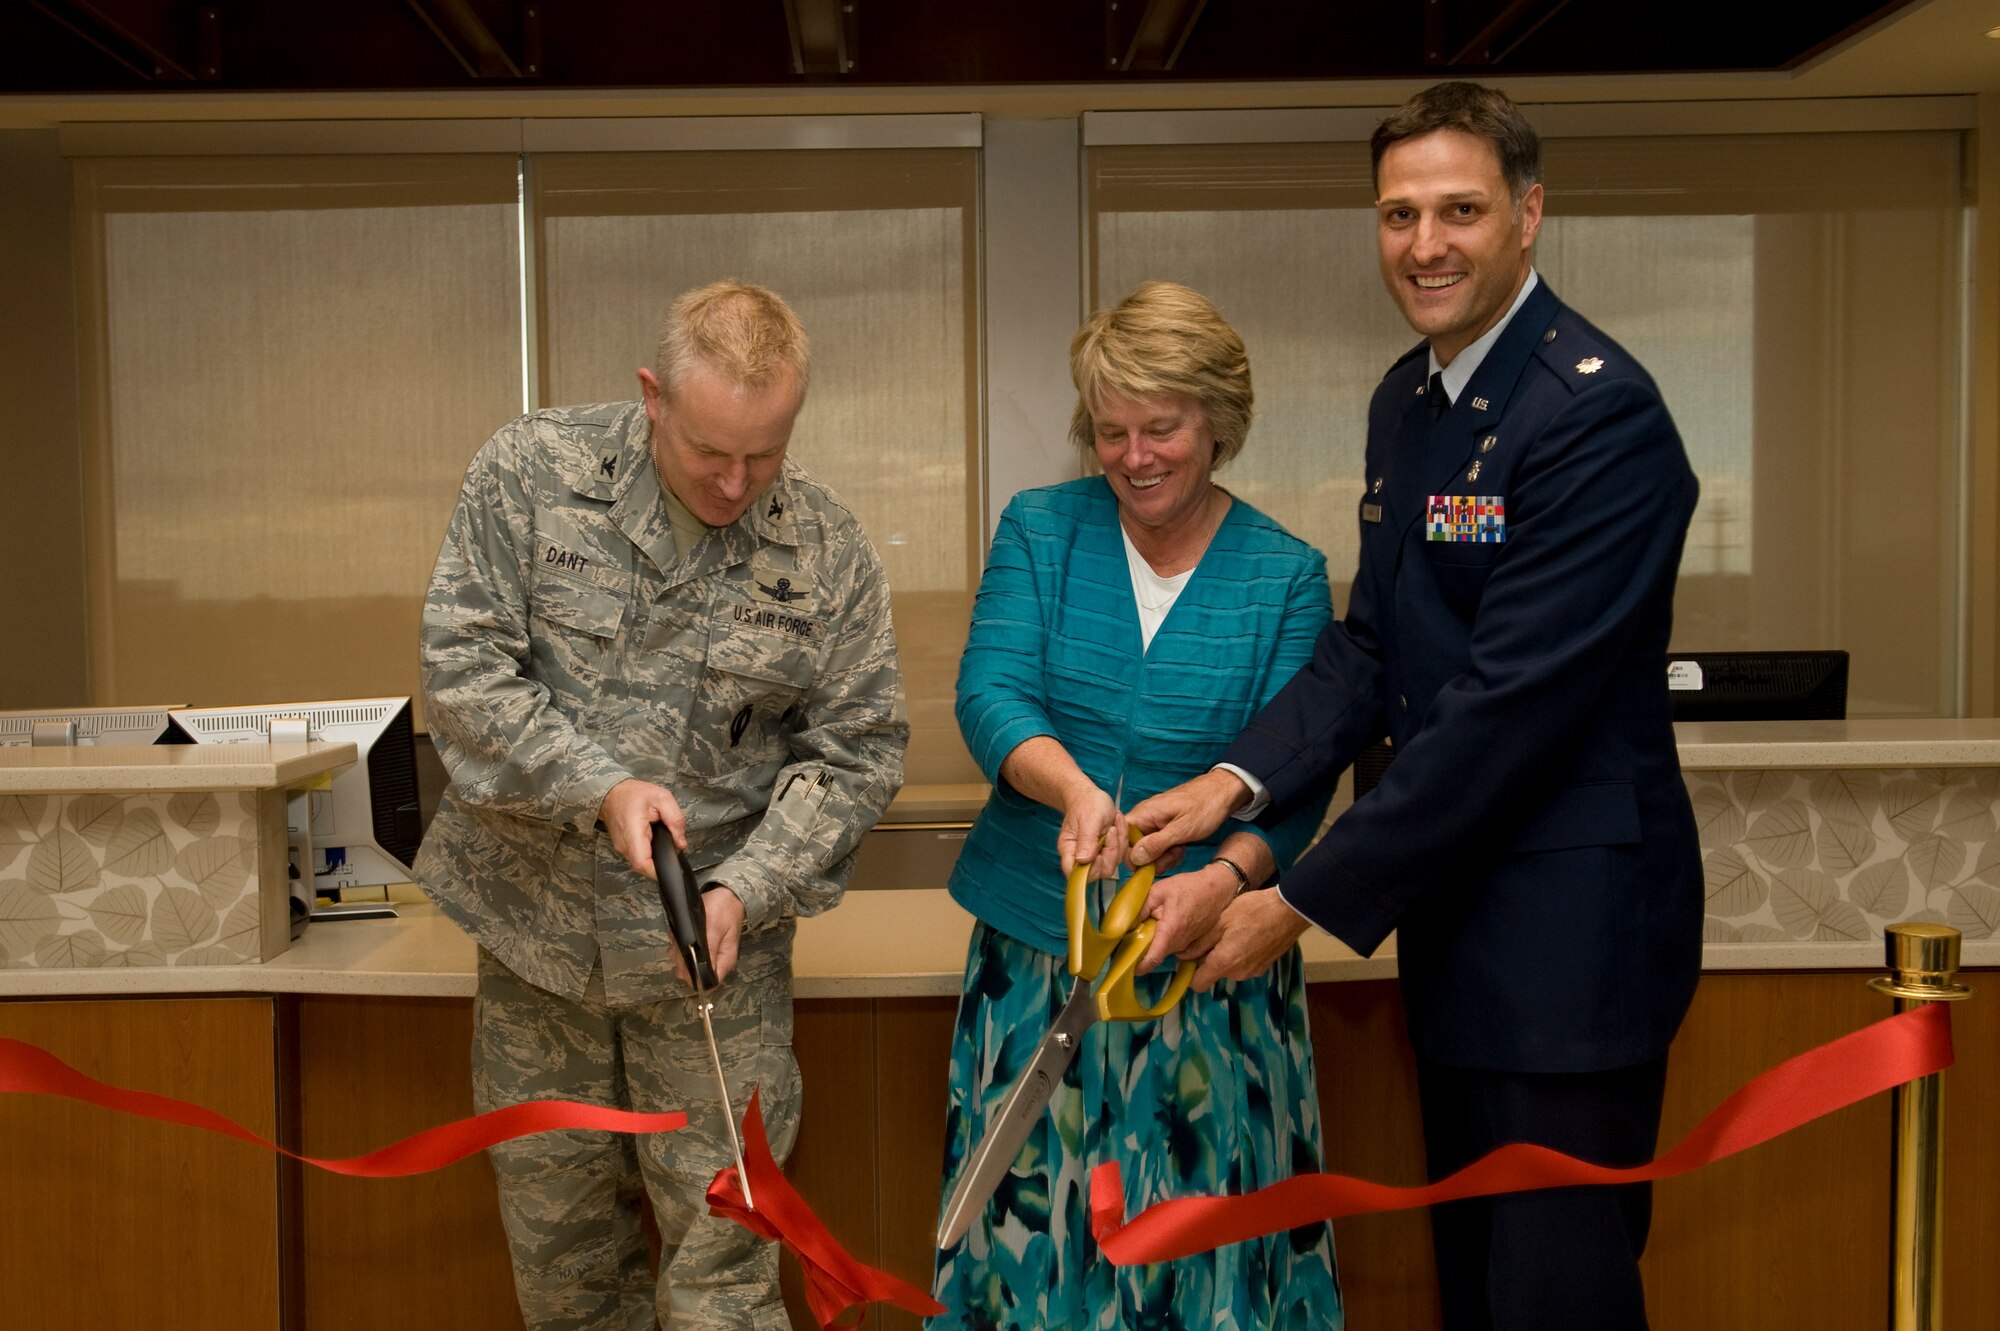 BUCKLEY AIR FORCE BASE, Colo. --   From left to right, Col. Daniel Dant, 460th Space Wing commander, Lynette A. Roff, Director of Veteran Affairs Eastern Colorado Health Care System, and Lt. Col. Scot Spann, 460th Medical Group deputy commander, cut the ribbon signifying the opening of the new Buckley Clinic, April 26, 2012.  The clinic was built as a collaboration between Buckley AFB and the VA, saving Buckley more than $150,000 a year. (U.S. Air Force photo by Airman 1st Class Phillip Houk)